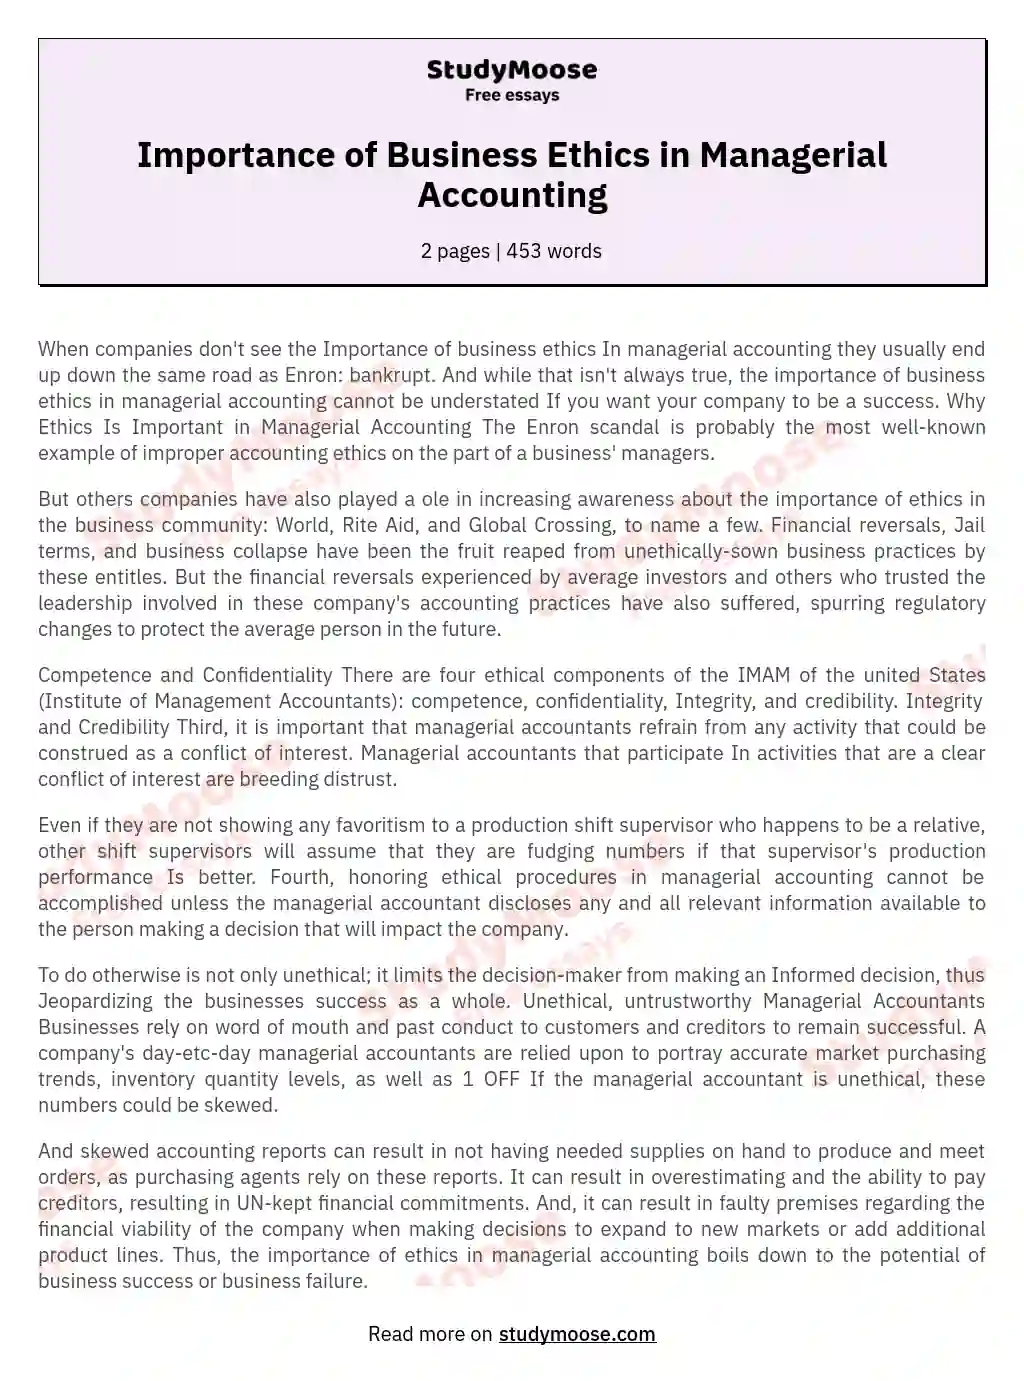 Importance of Business Ethics in Managerial Accounting essay